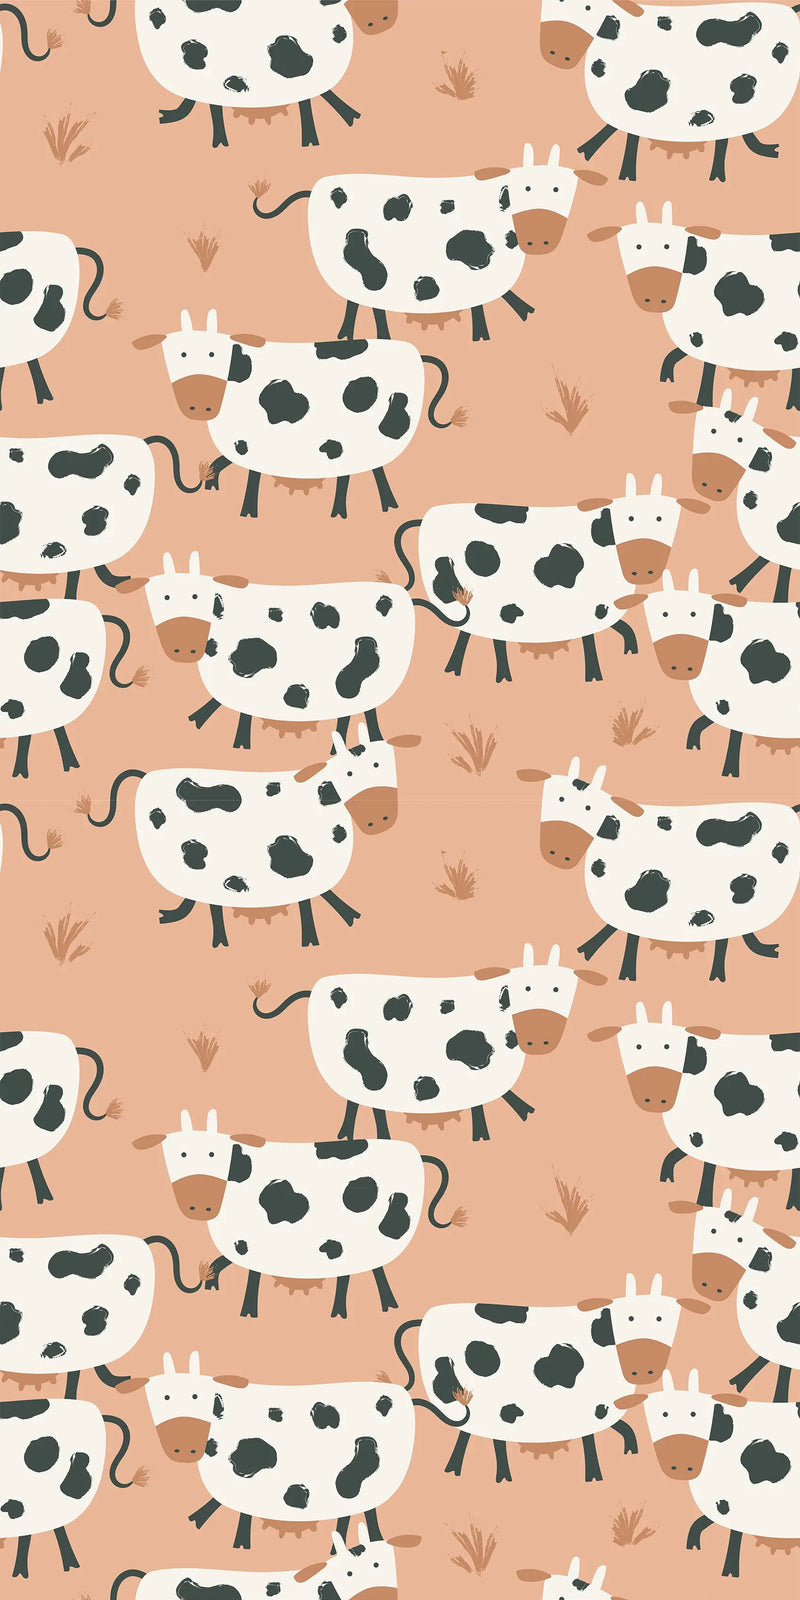 Cows On Tan - Peel and Stick Removable Wallpaper I Heart Wall Art Australia 